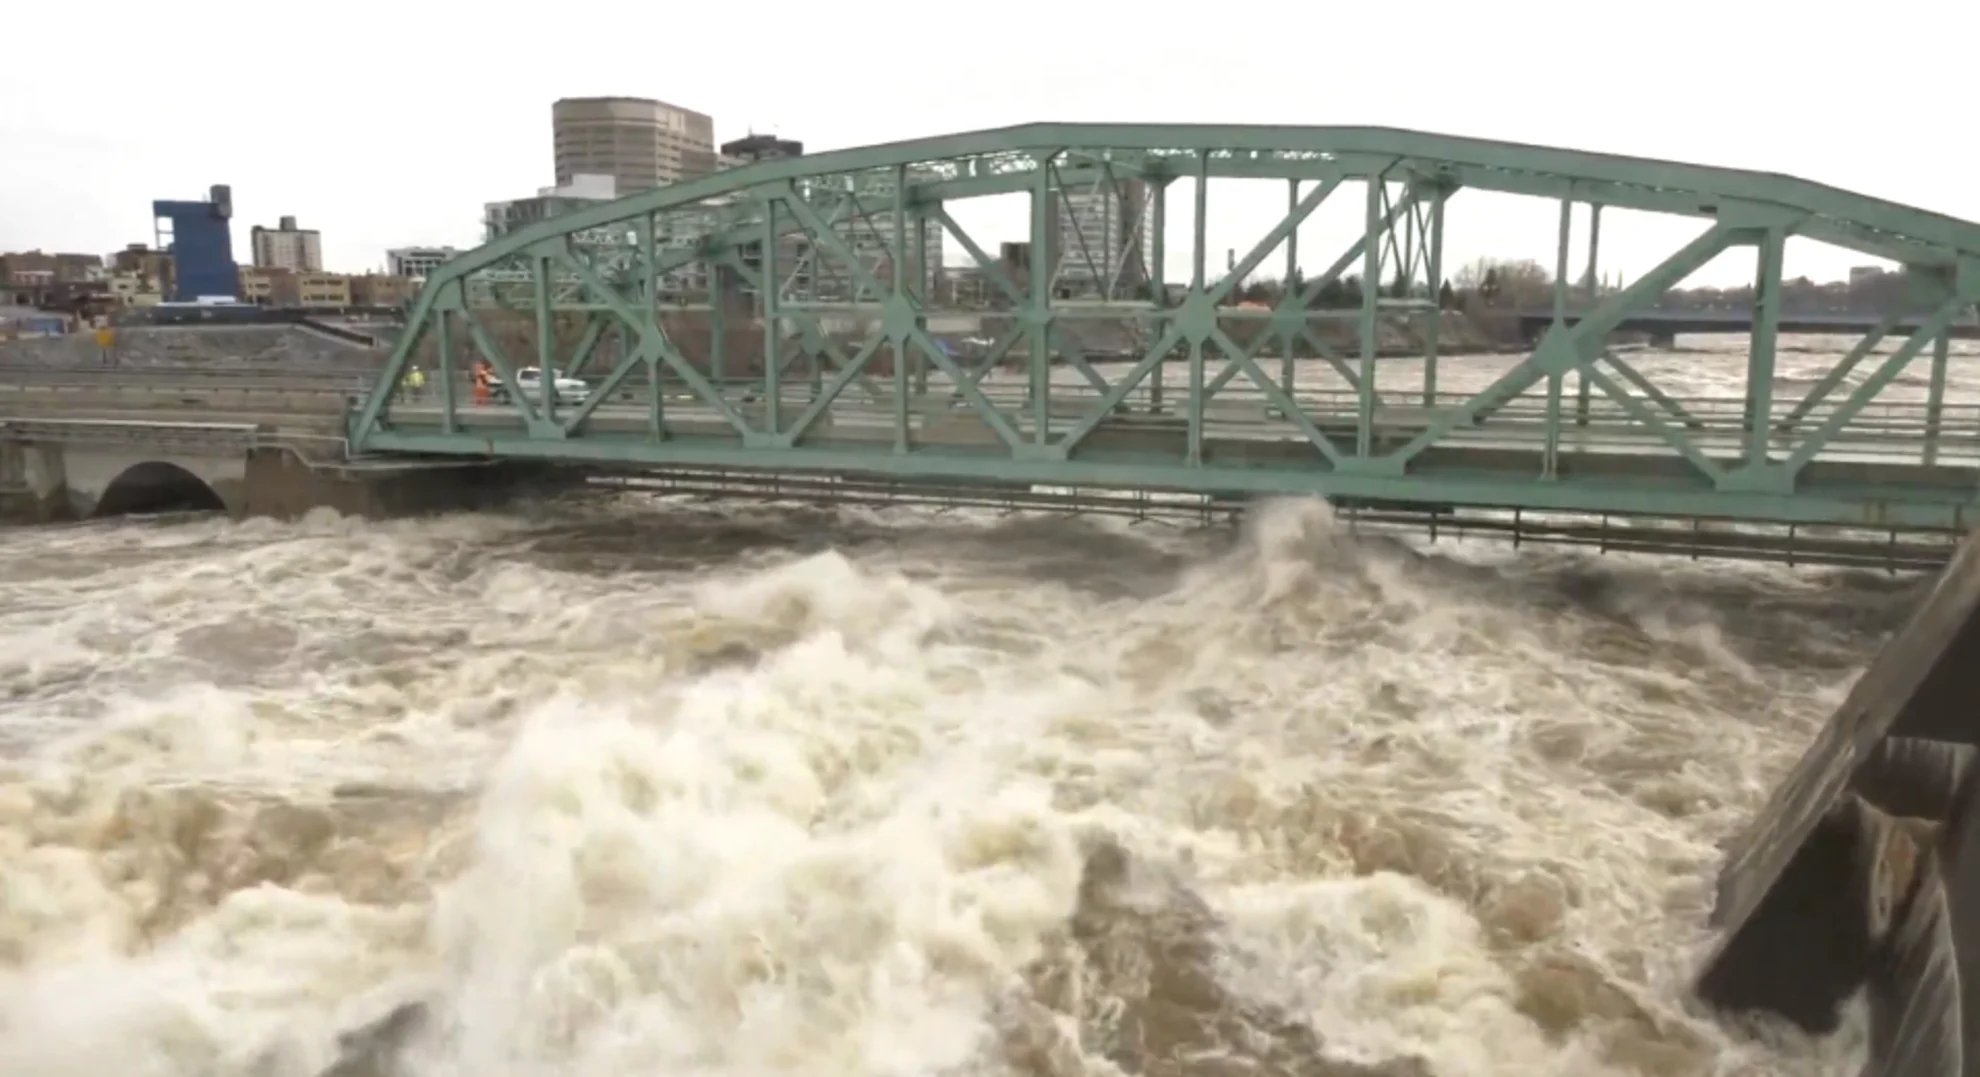 Ottawa River reached peak level in 2019 — Canada’s #1 weather event of the year